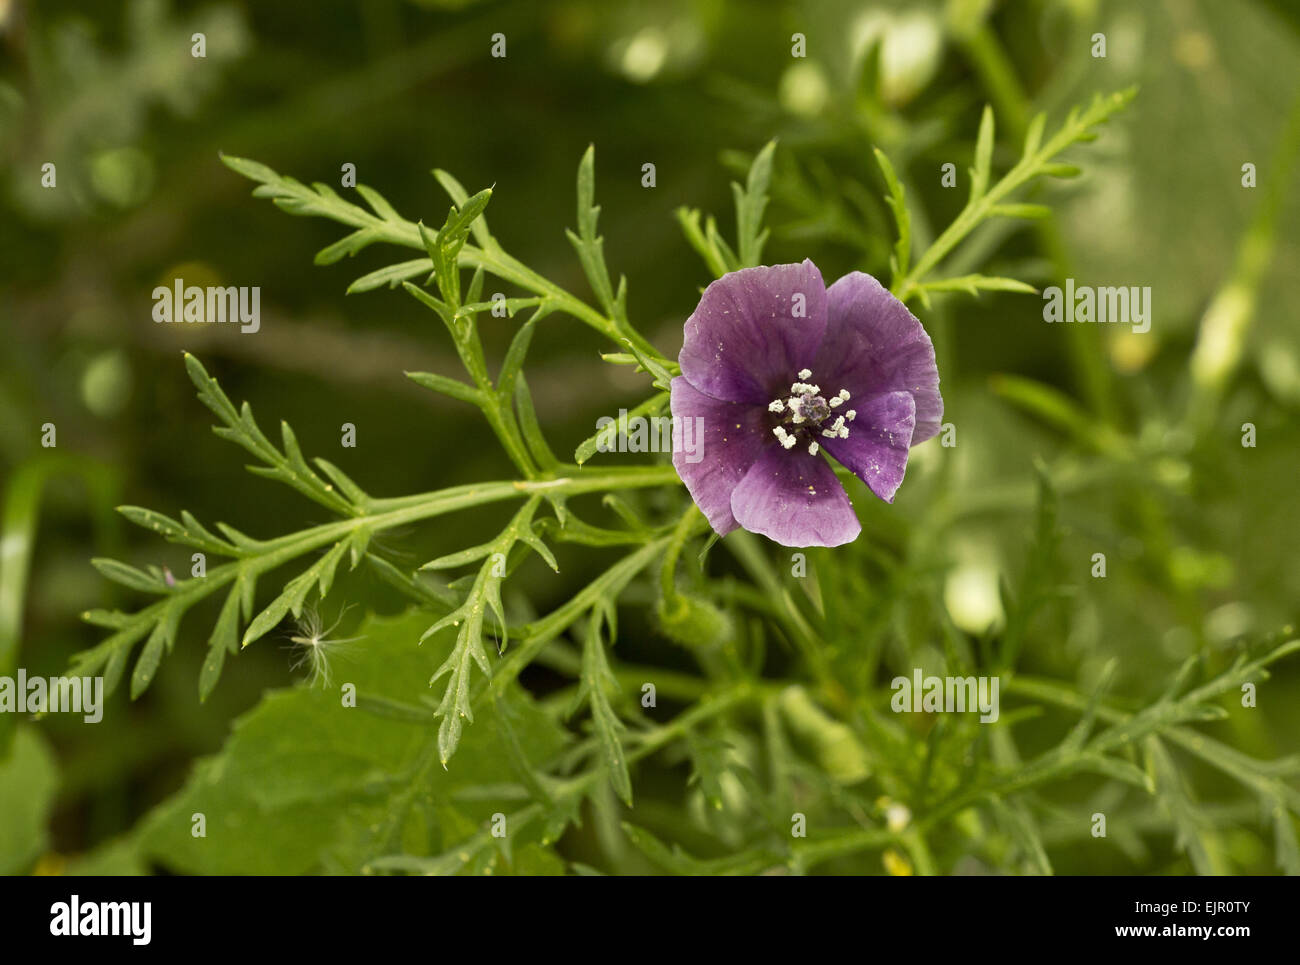 Violet Horned Poppy (Roemeria hybrida) flowering, growing in disturbed ground, Cyprus, March Stock Photo